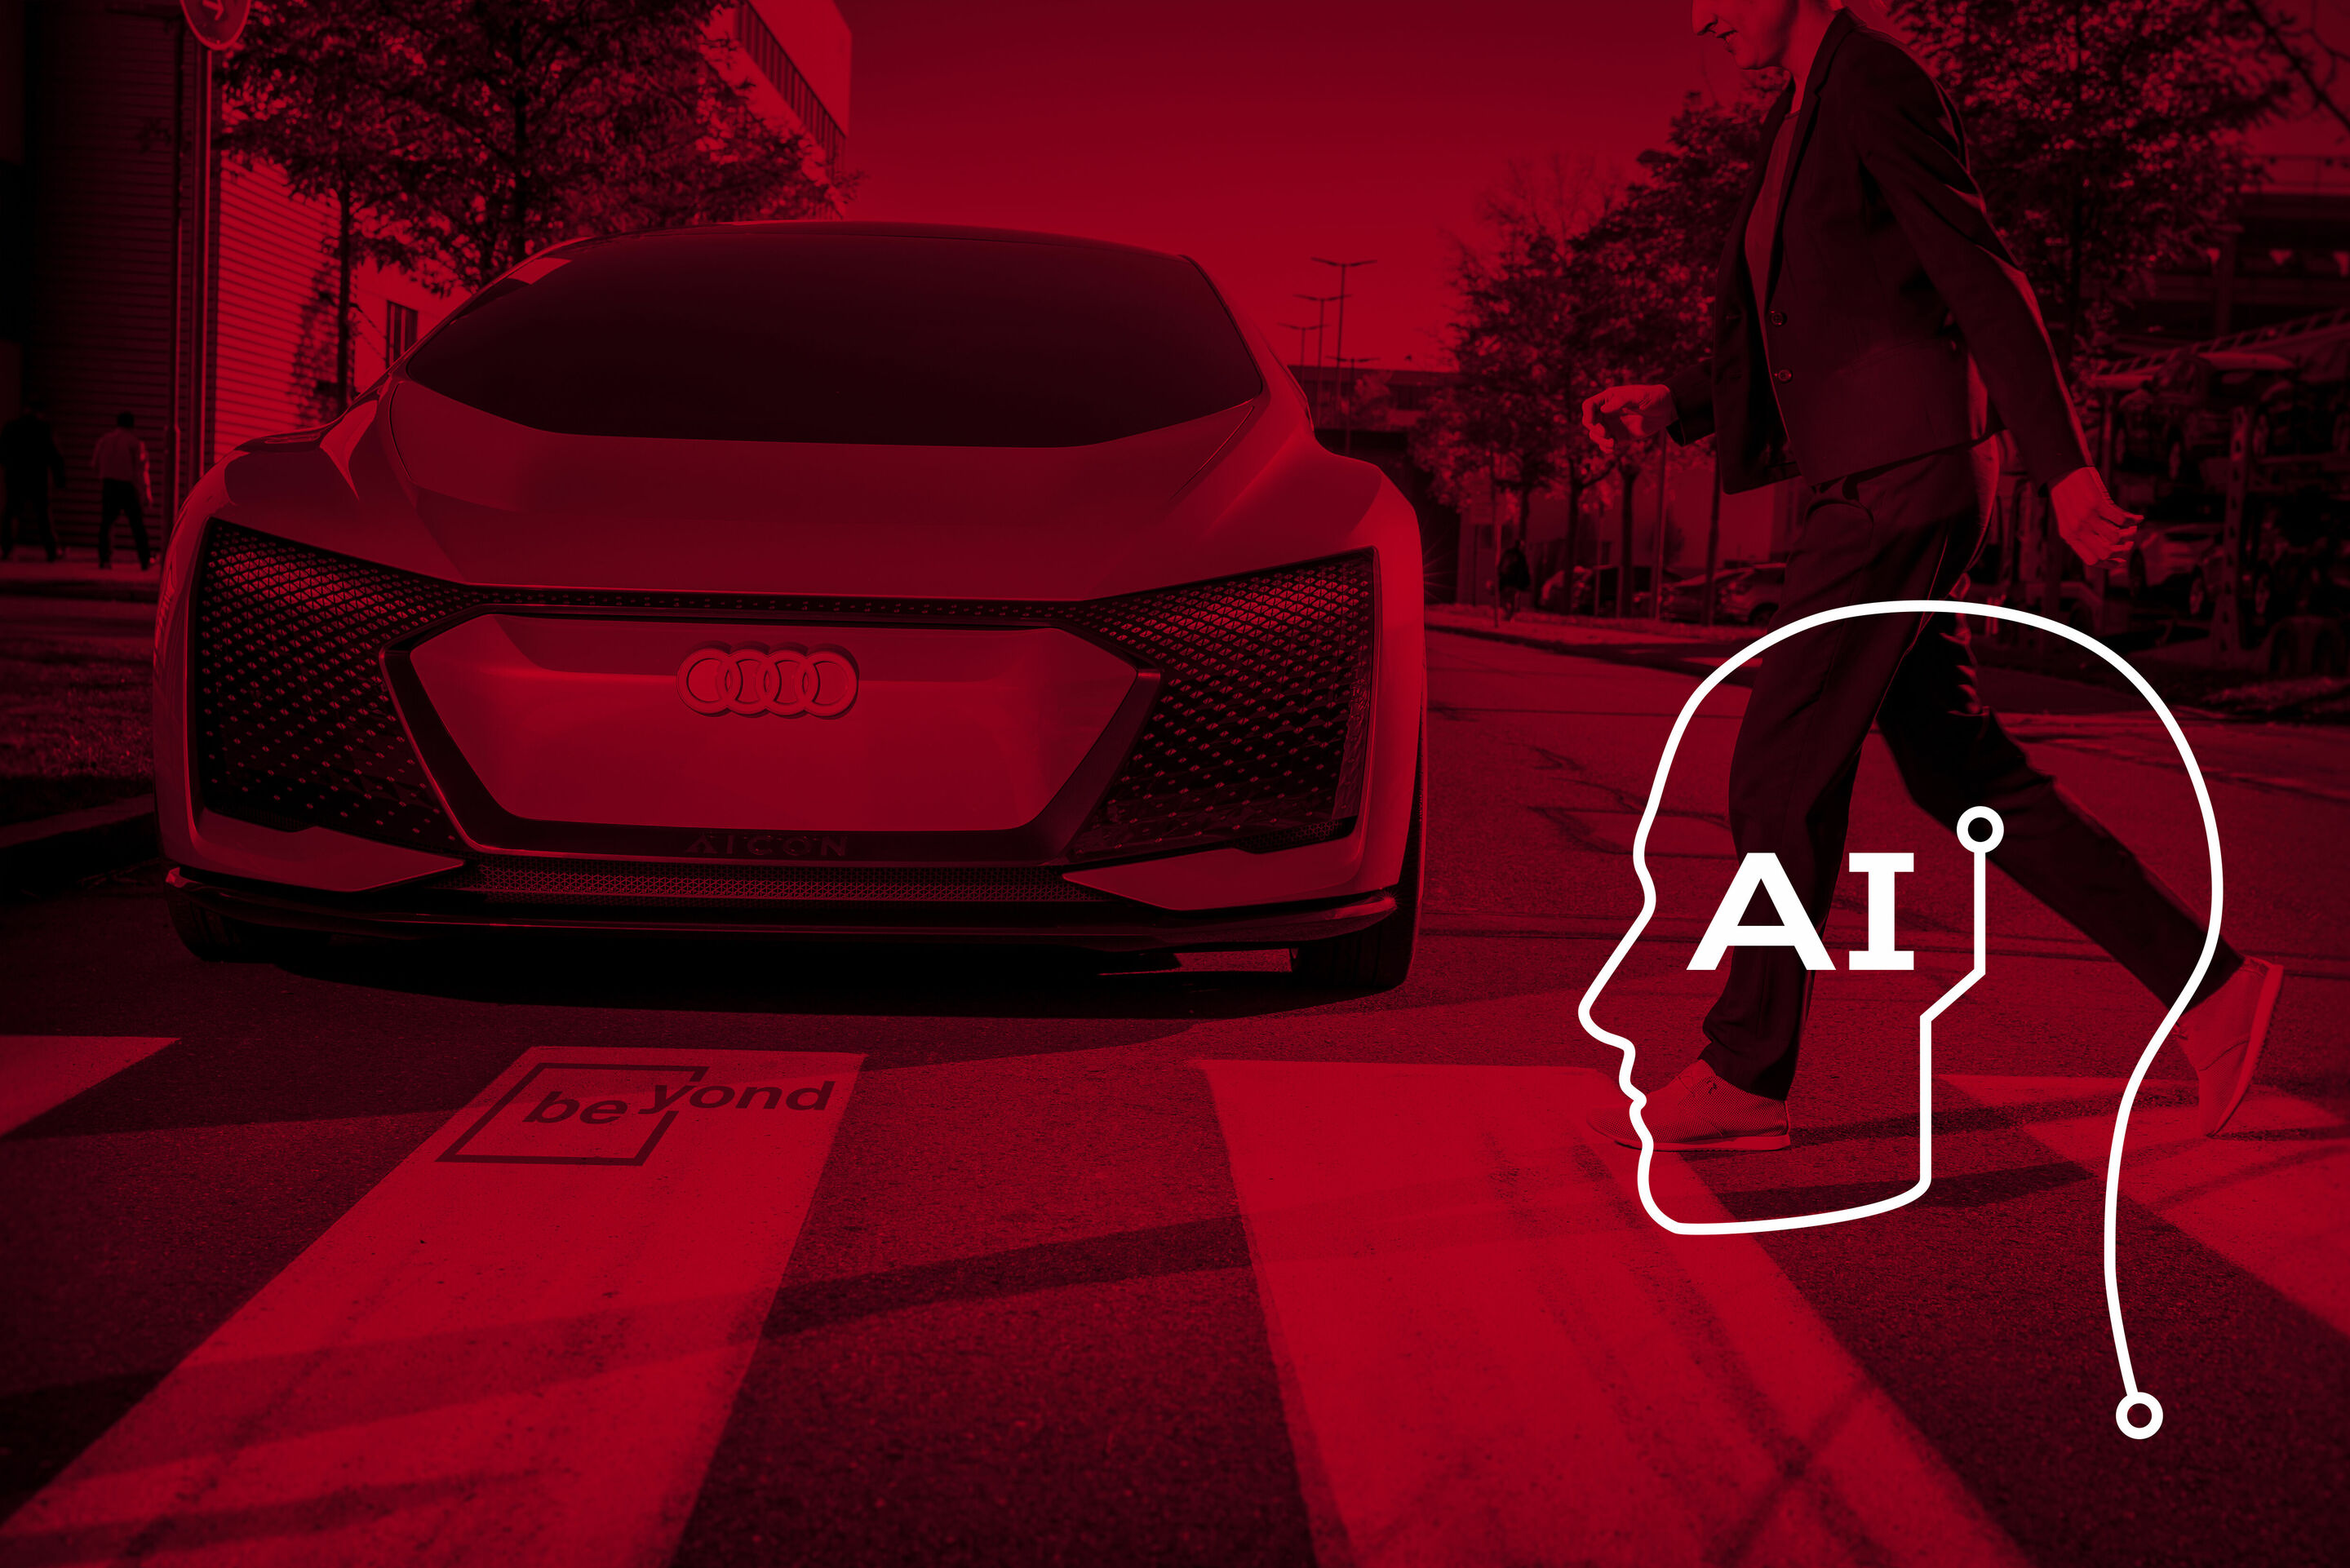 Audi and beyond initiative speak out  for responsible use of AI at global forum